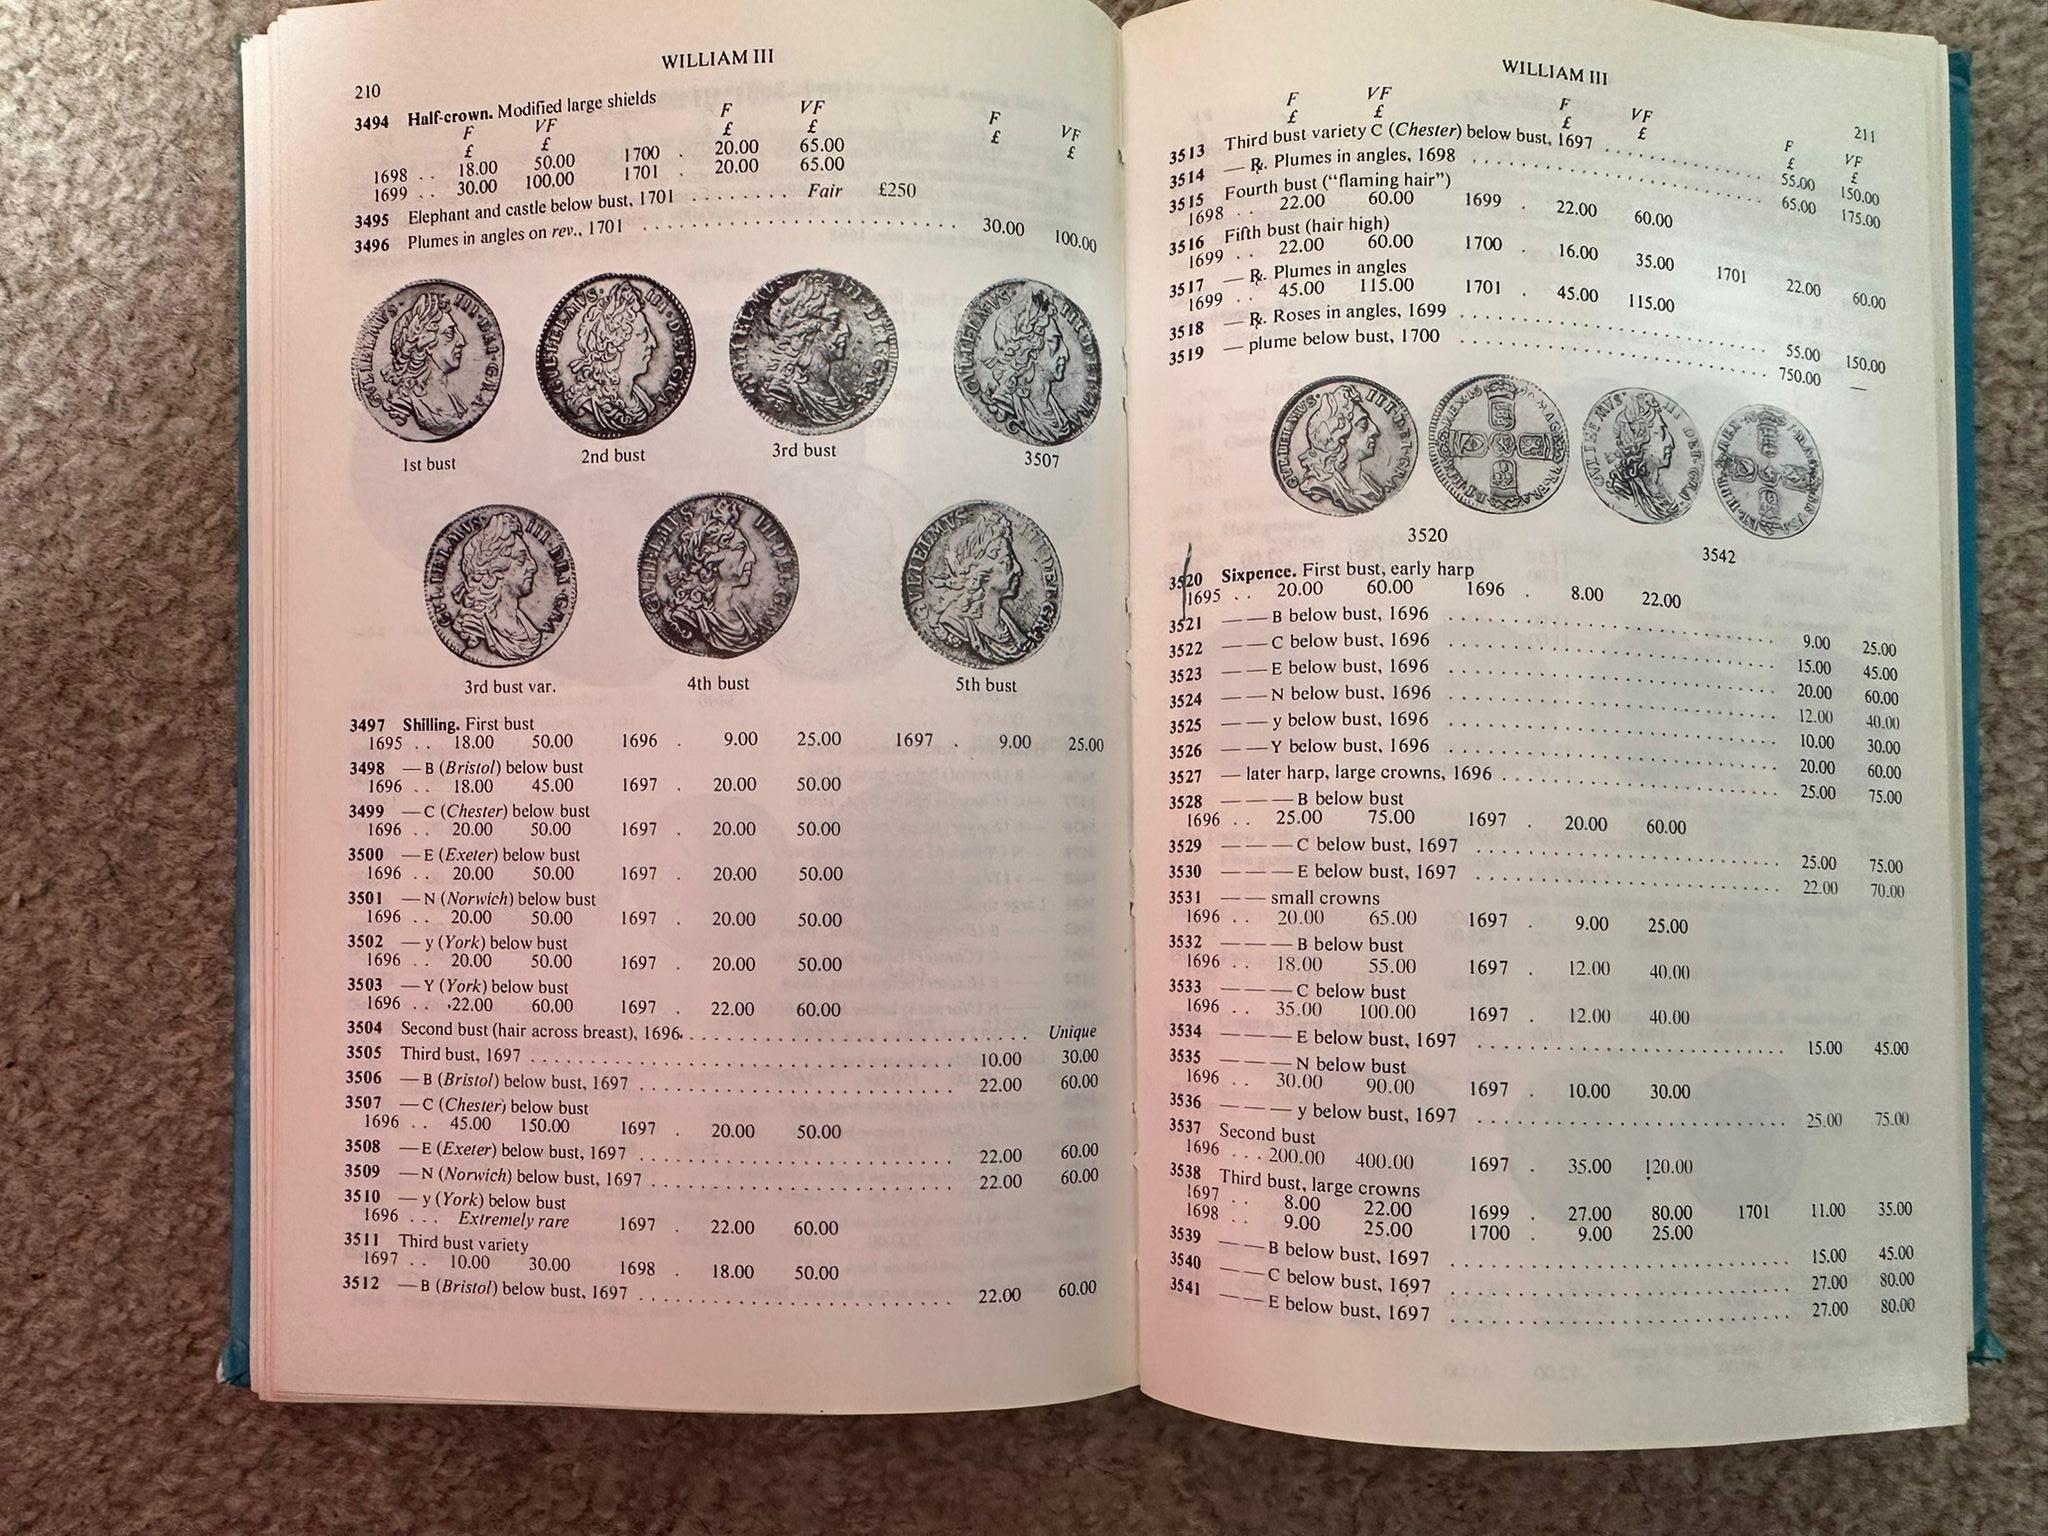 Coins of England book - Image 3 of 3